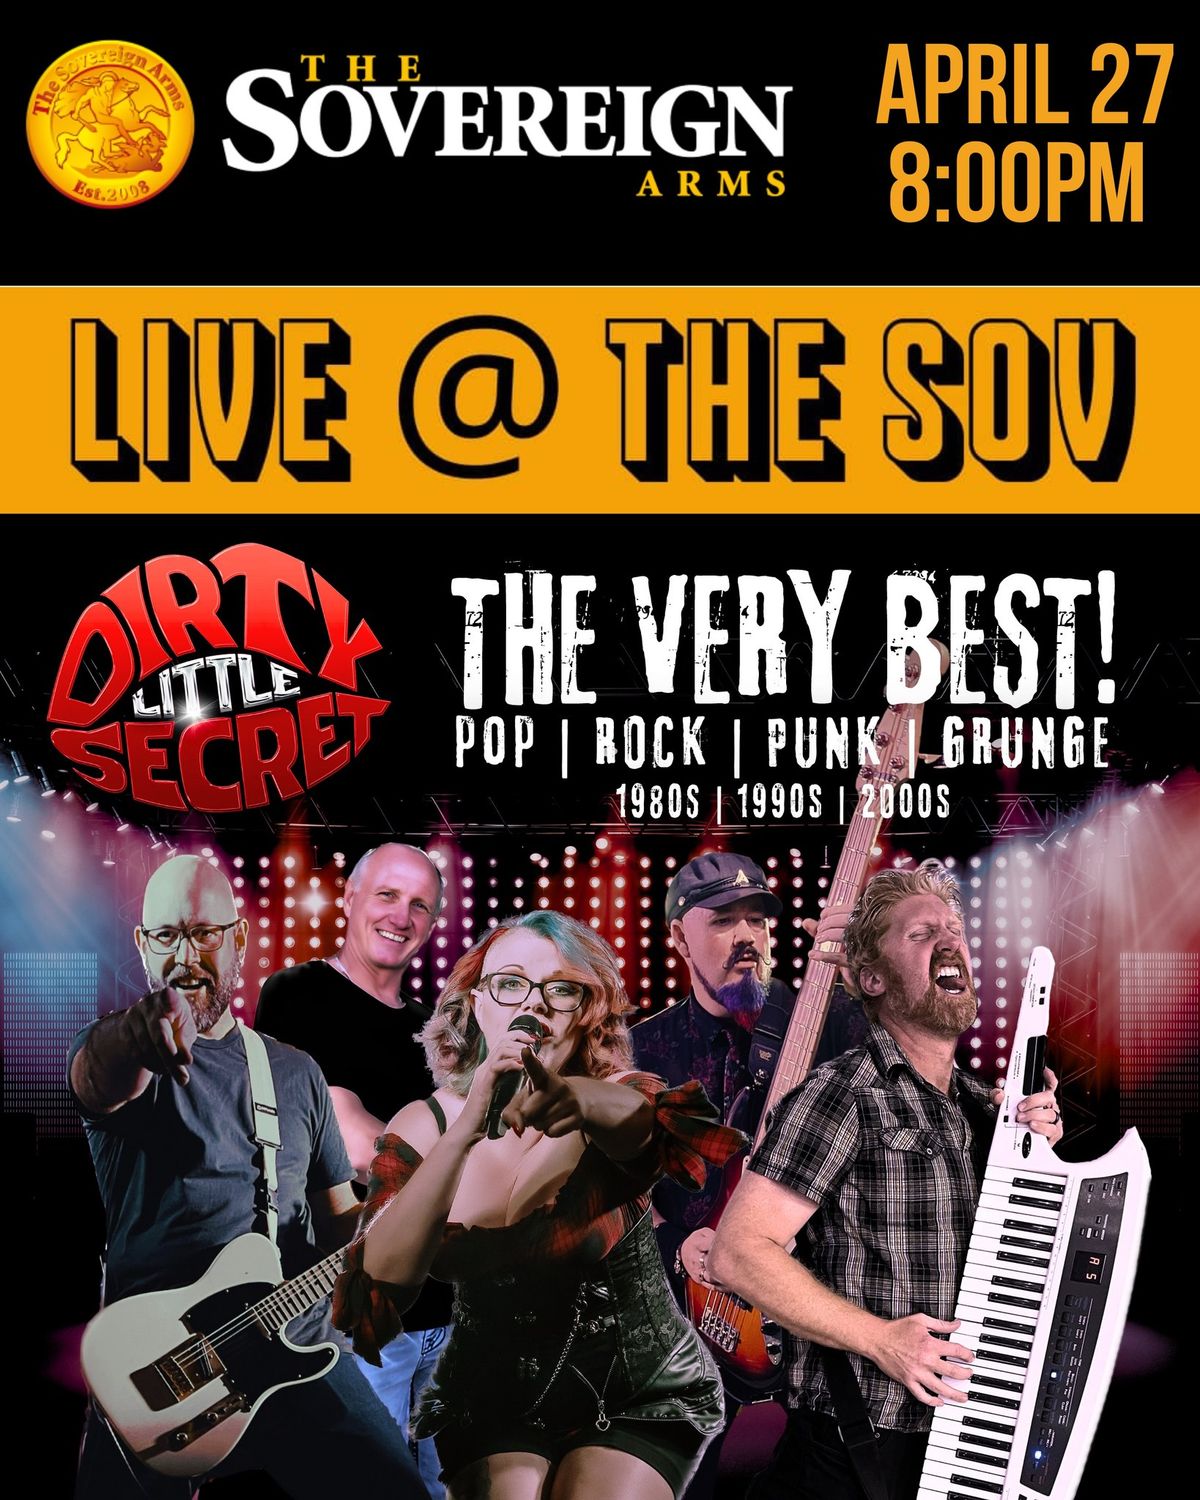 Dirty Little Secret - THE VERY BEST! - LIVE @ the SOV!